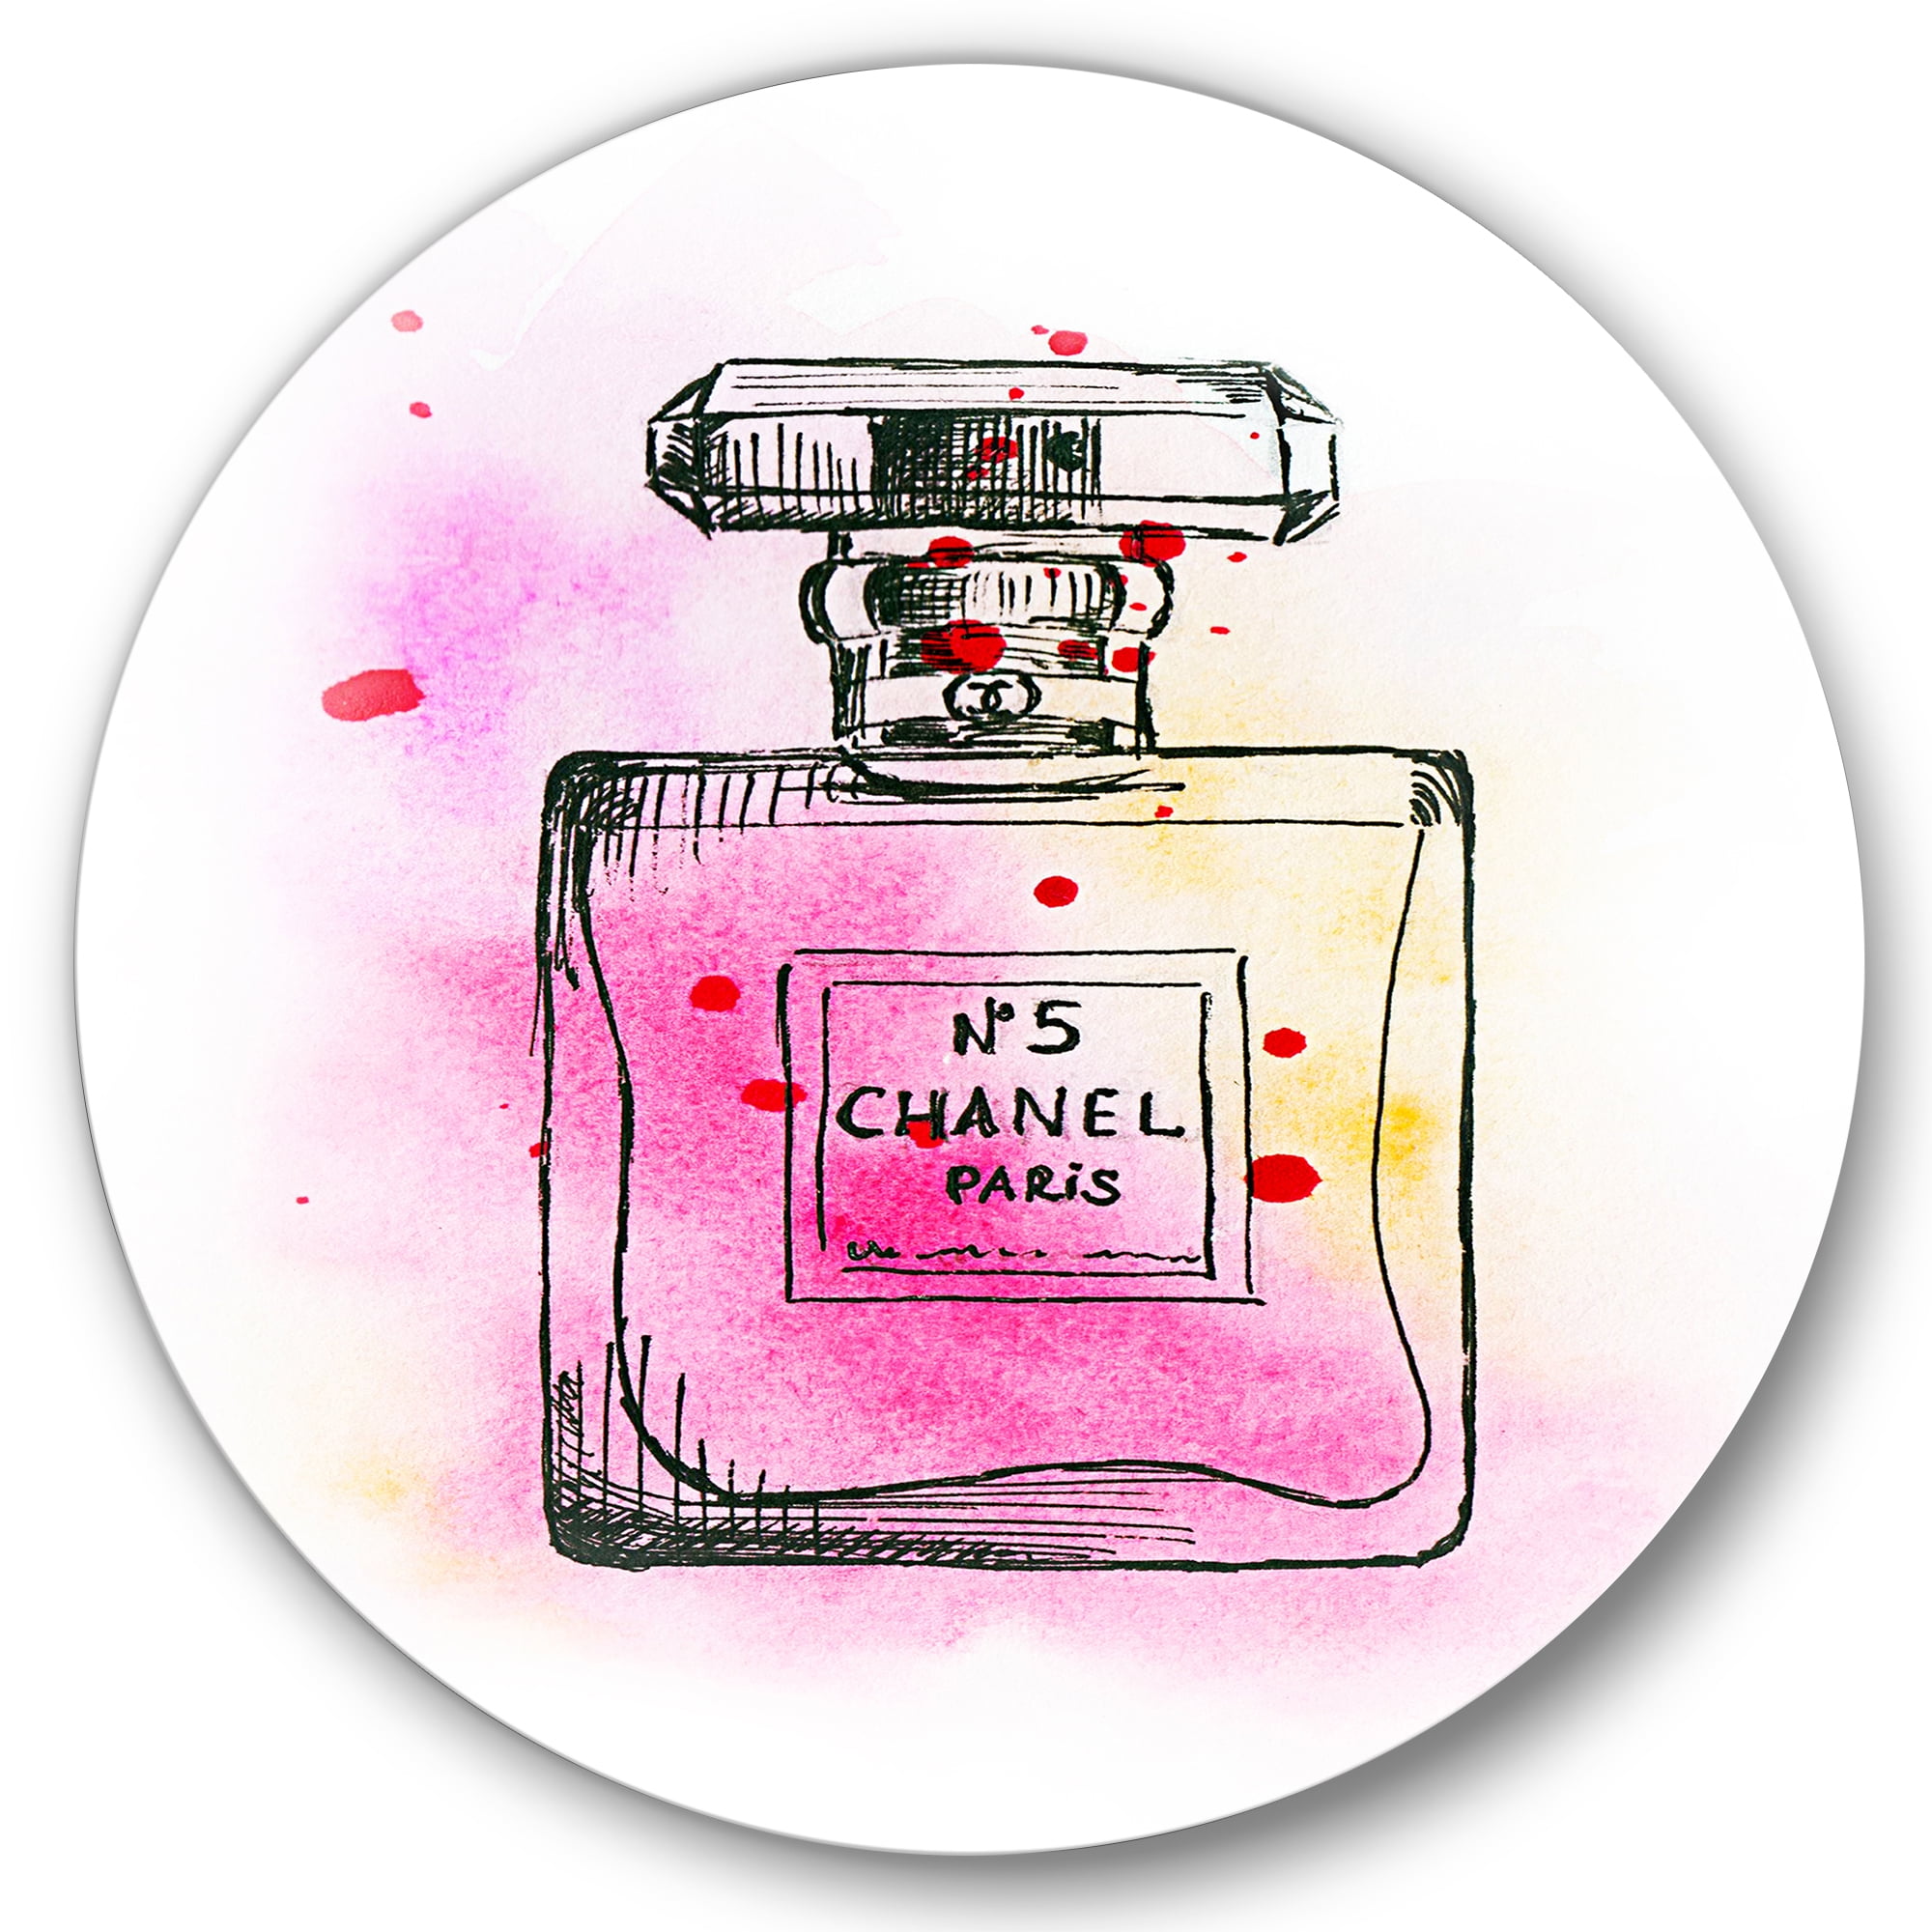 inspired by chanel no 5 perfume